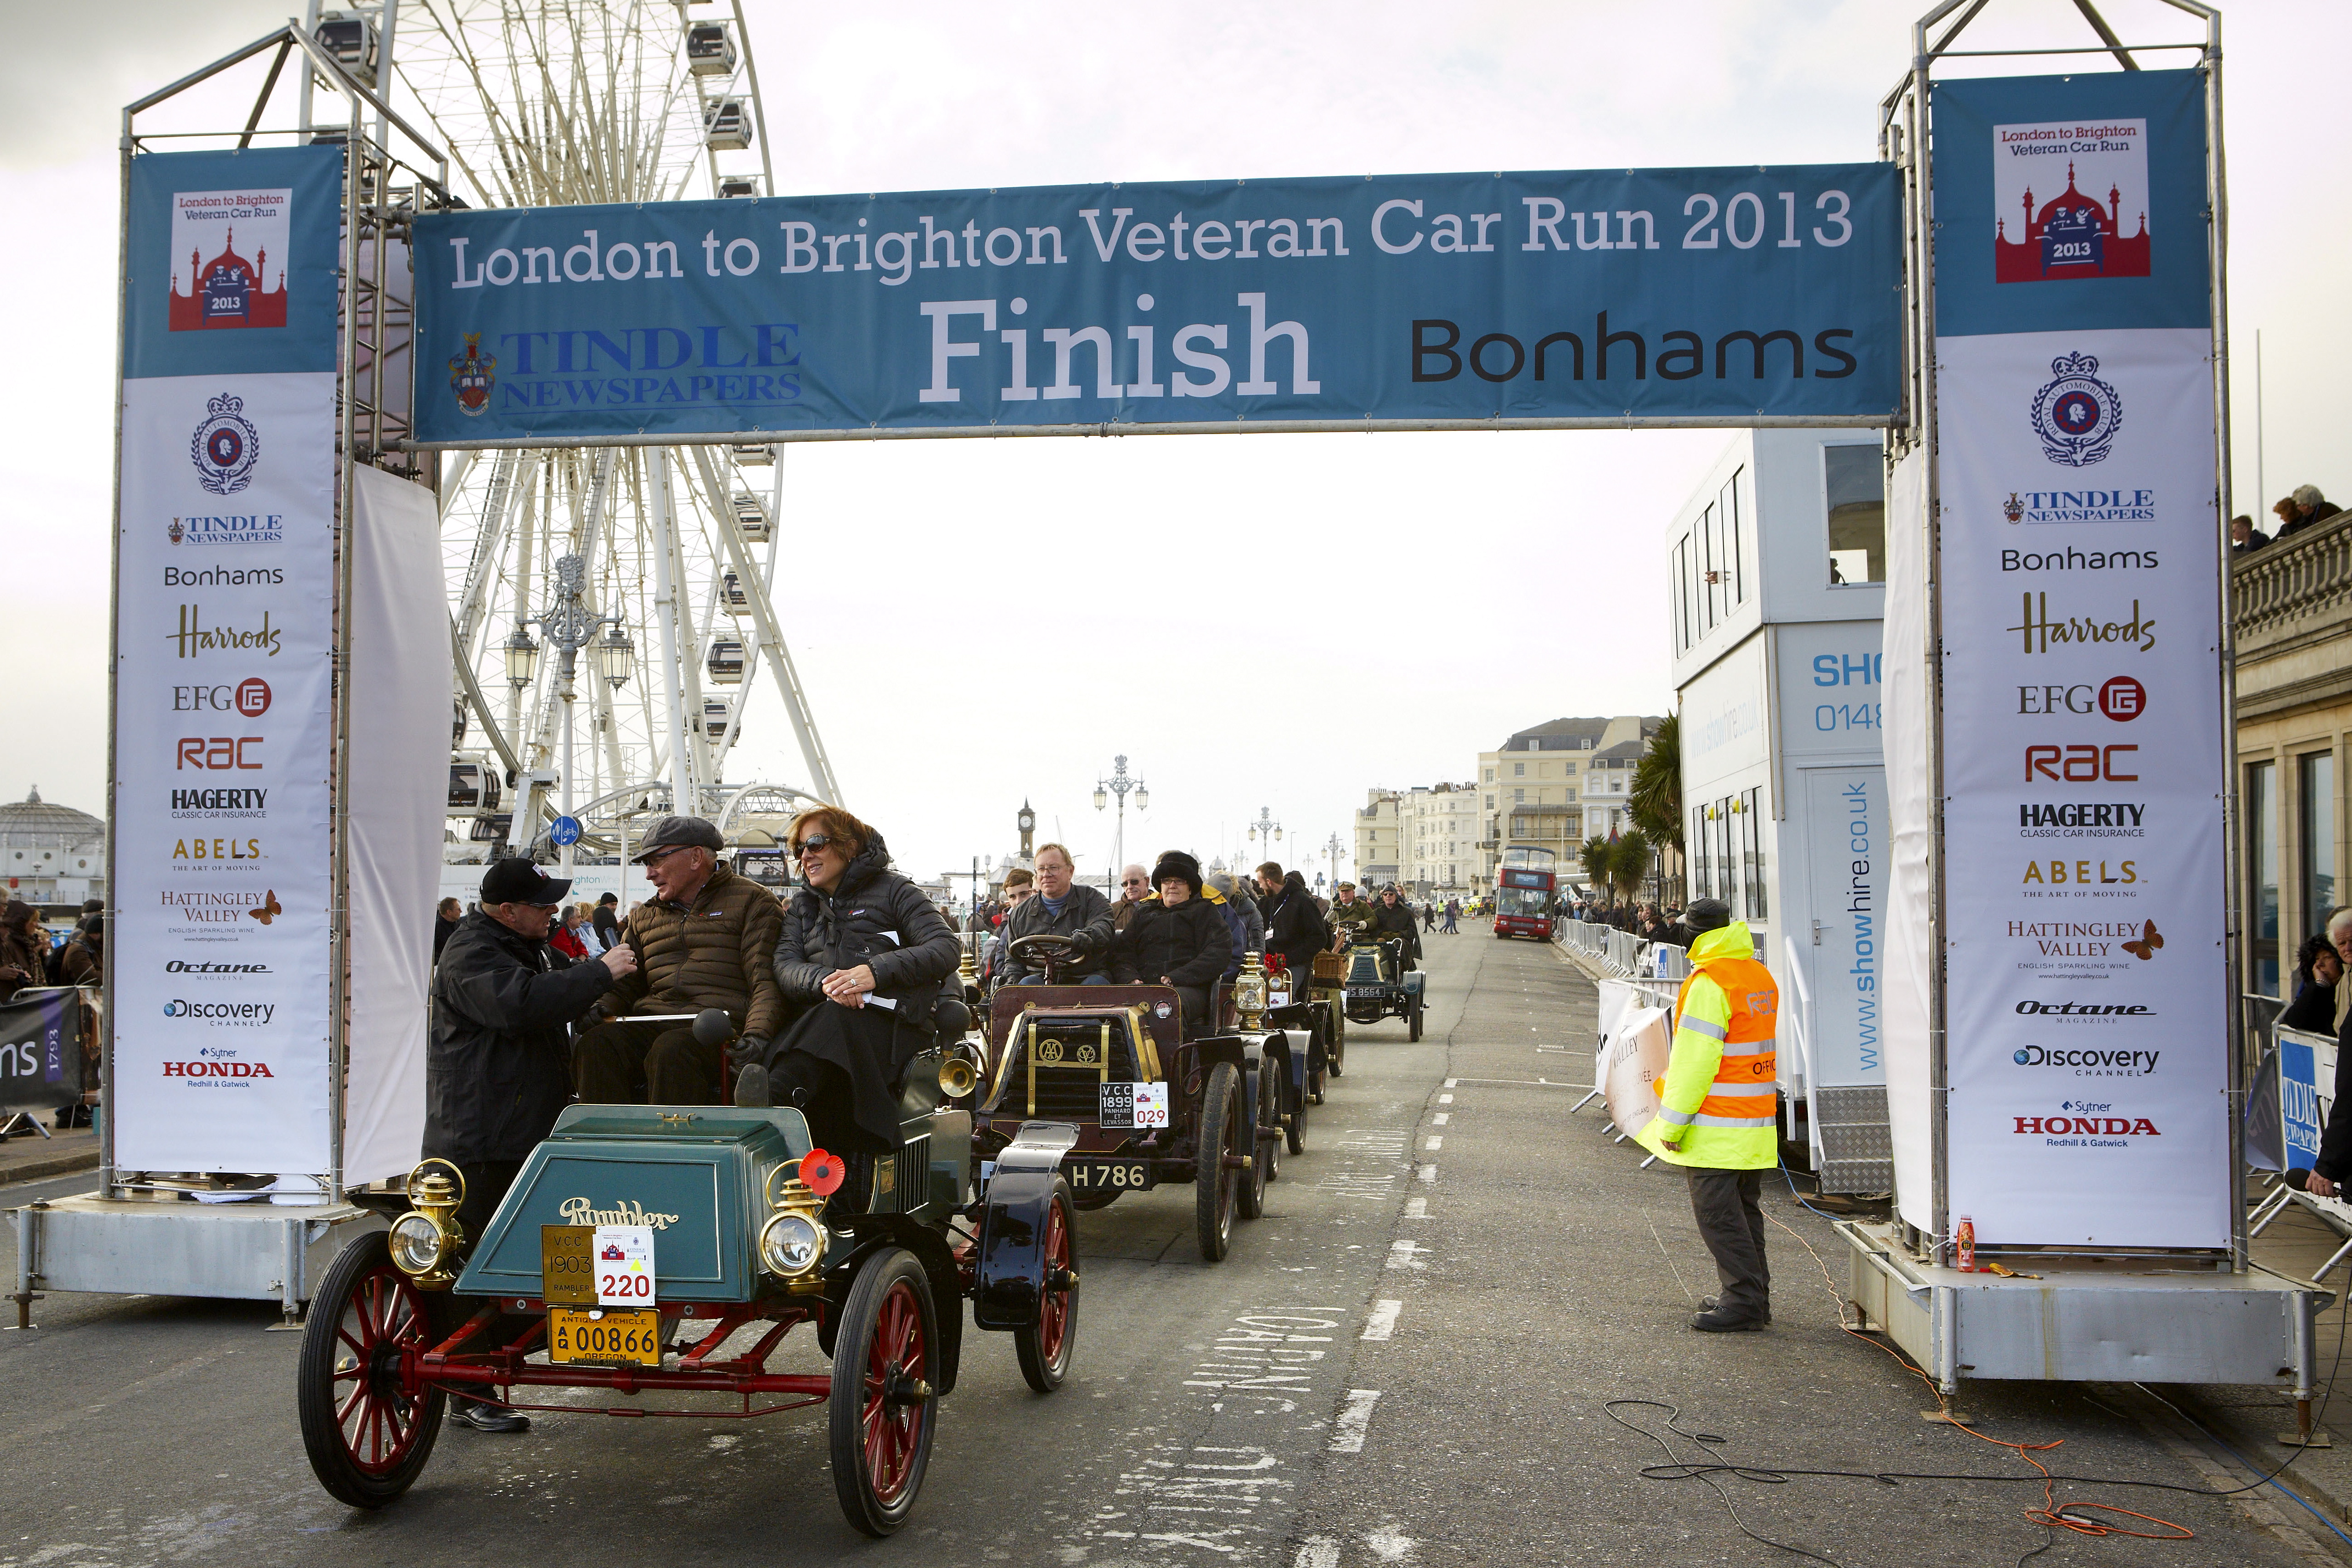 BONHAMS EXTENDS ITS SUPPORT FOR THE FAMOUS VETERAN CAR RUN cover